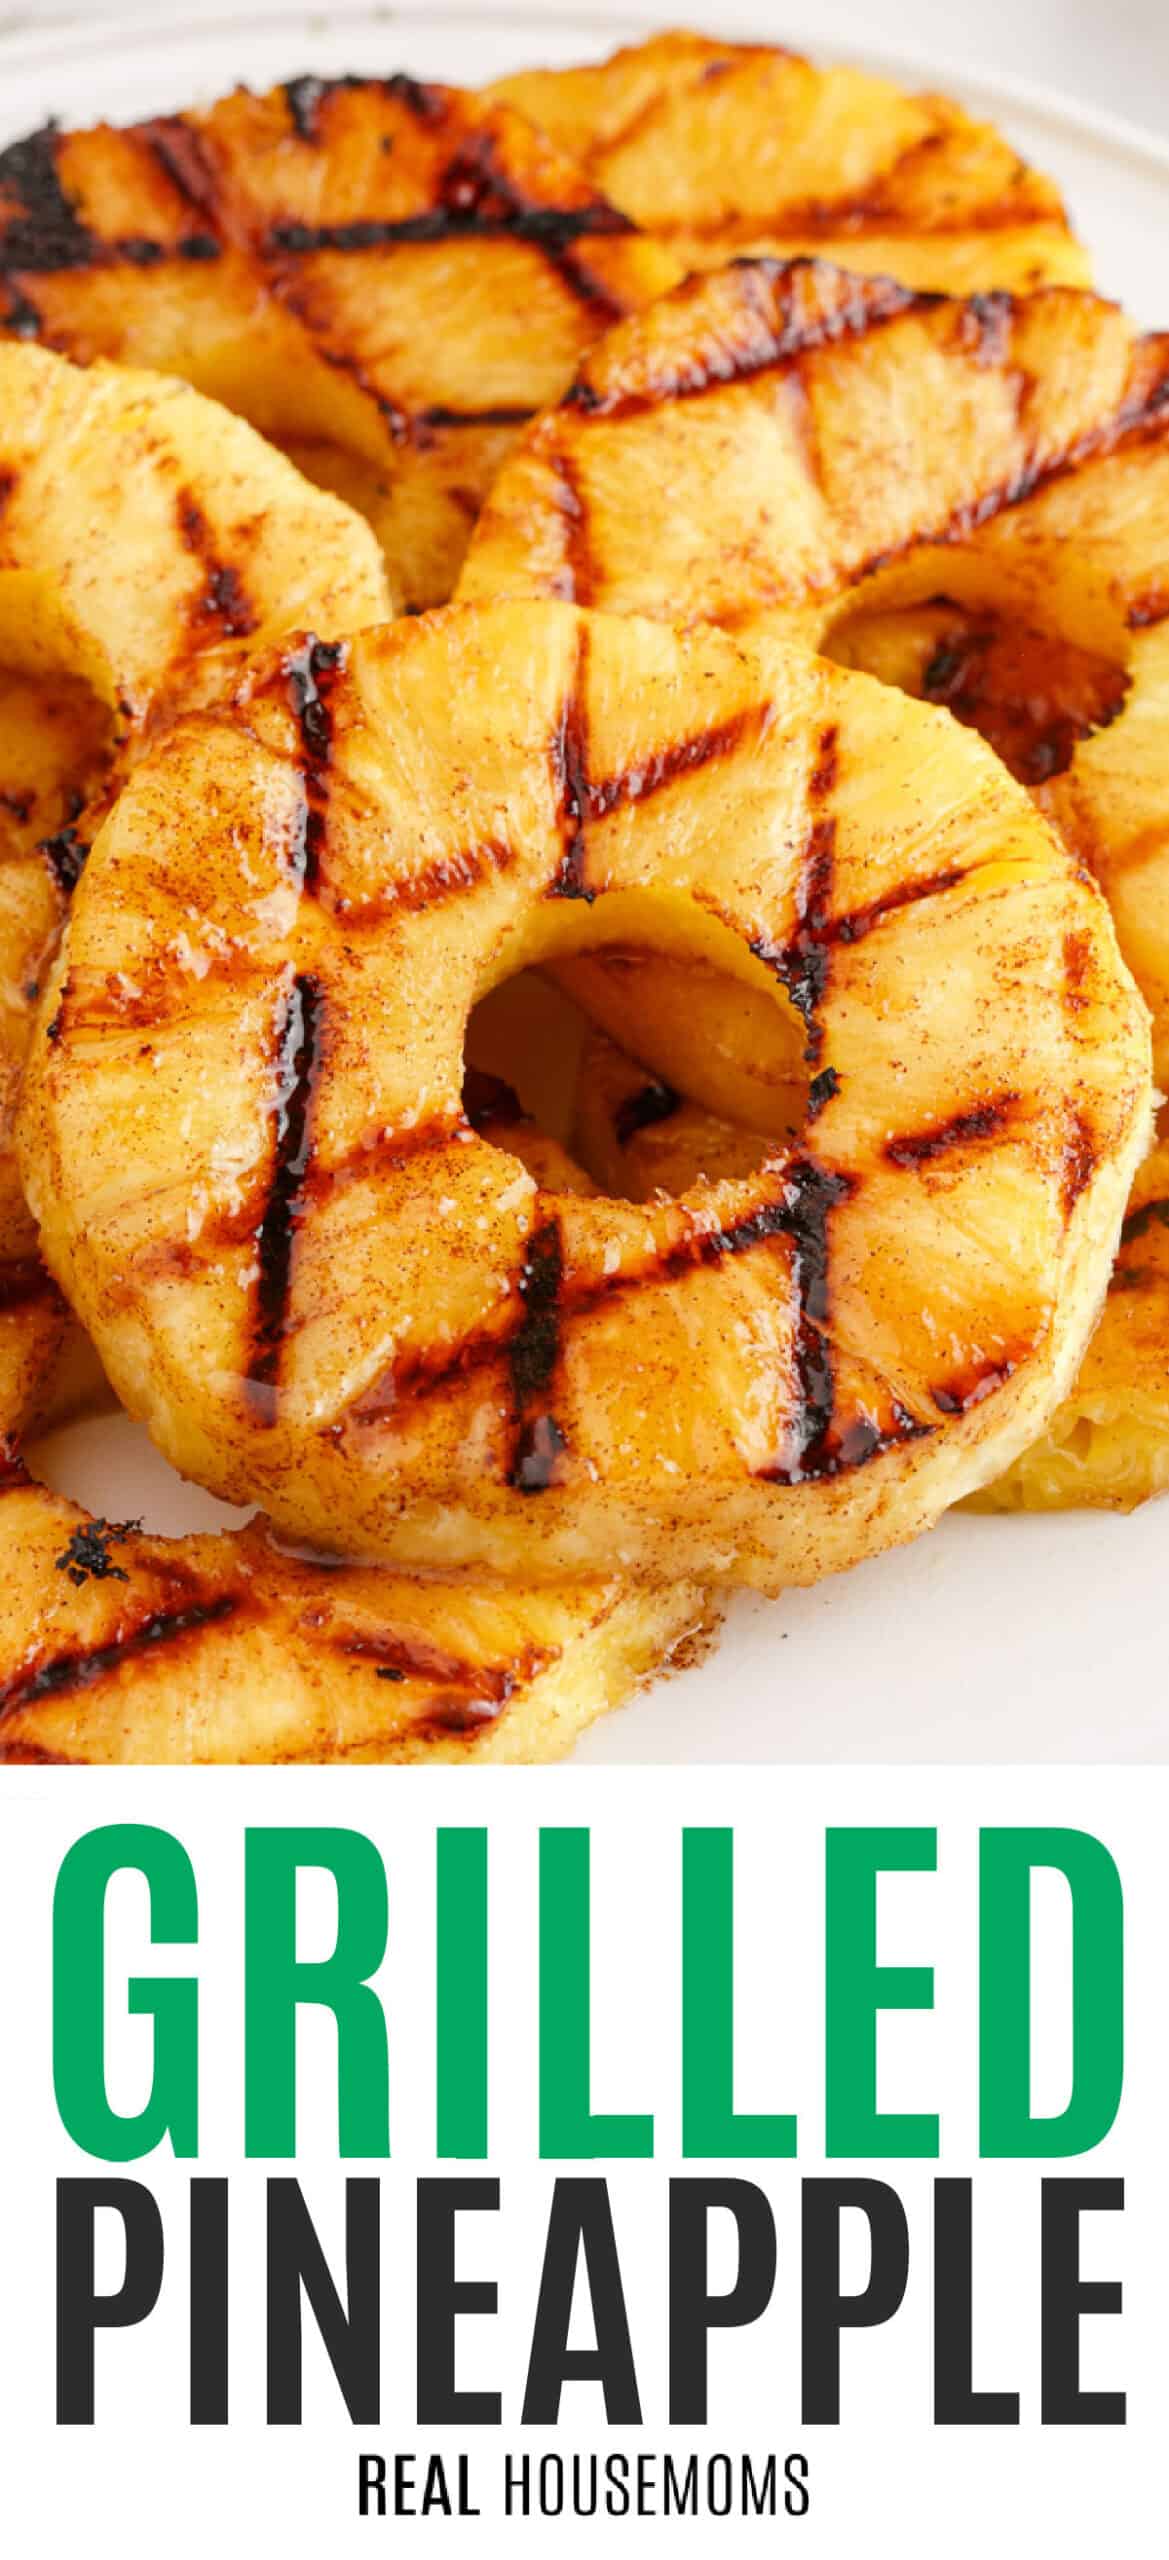 Grilled Pineapple Real Housemoms